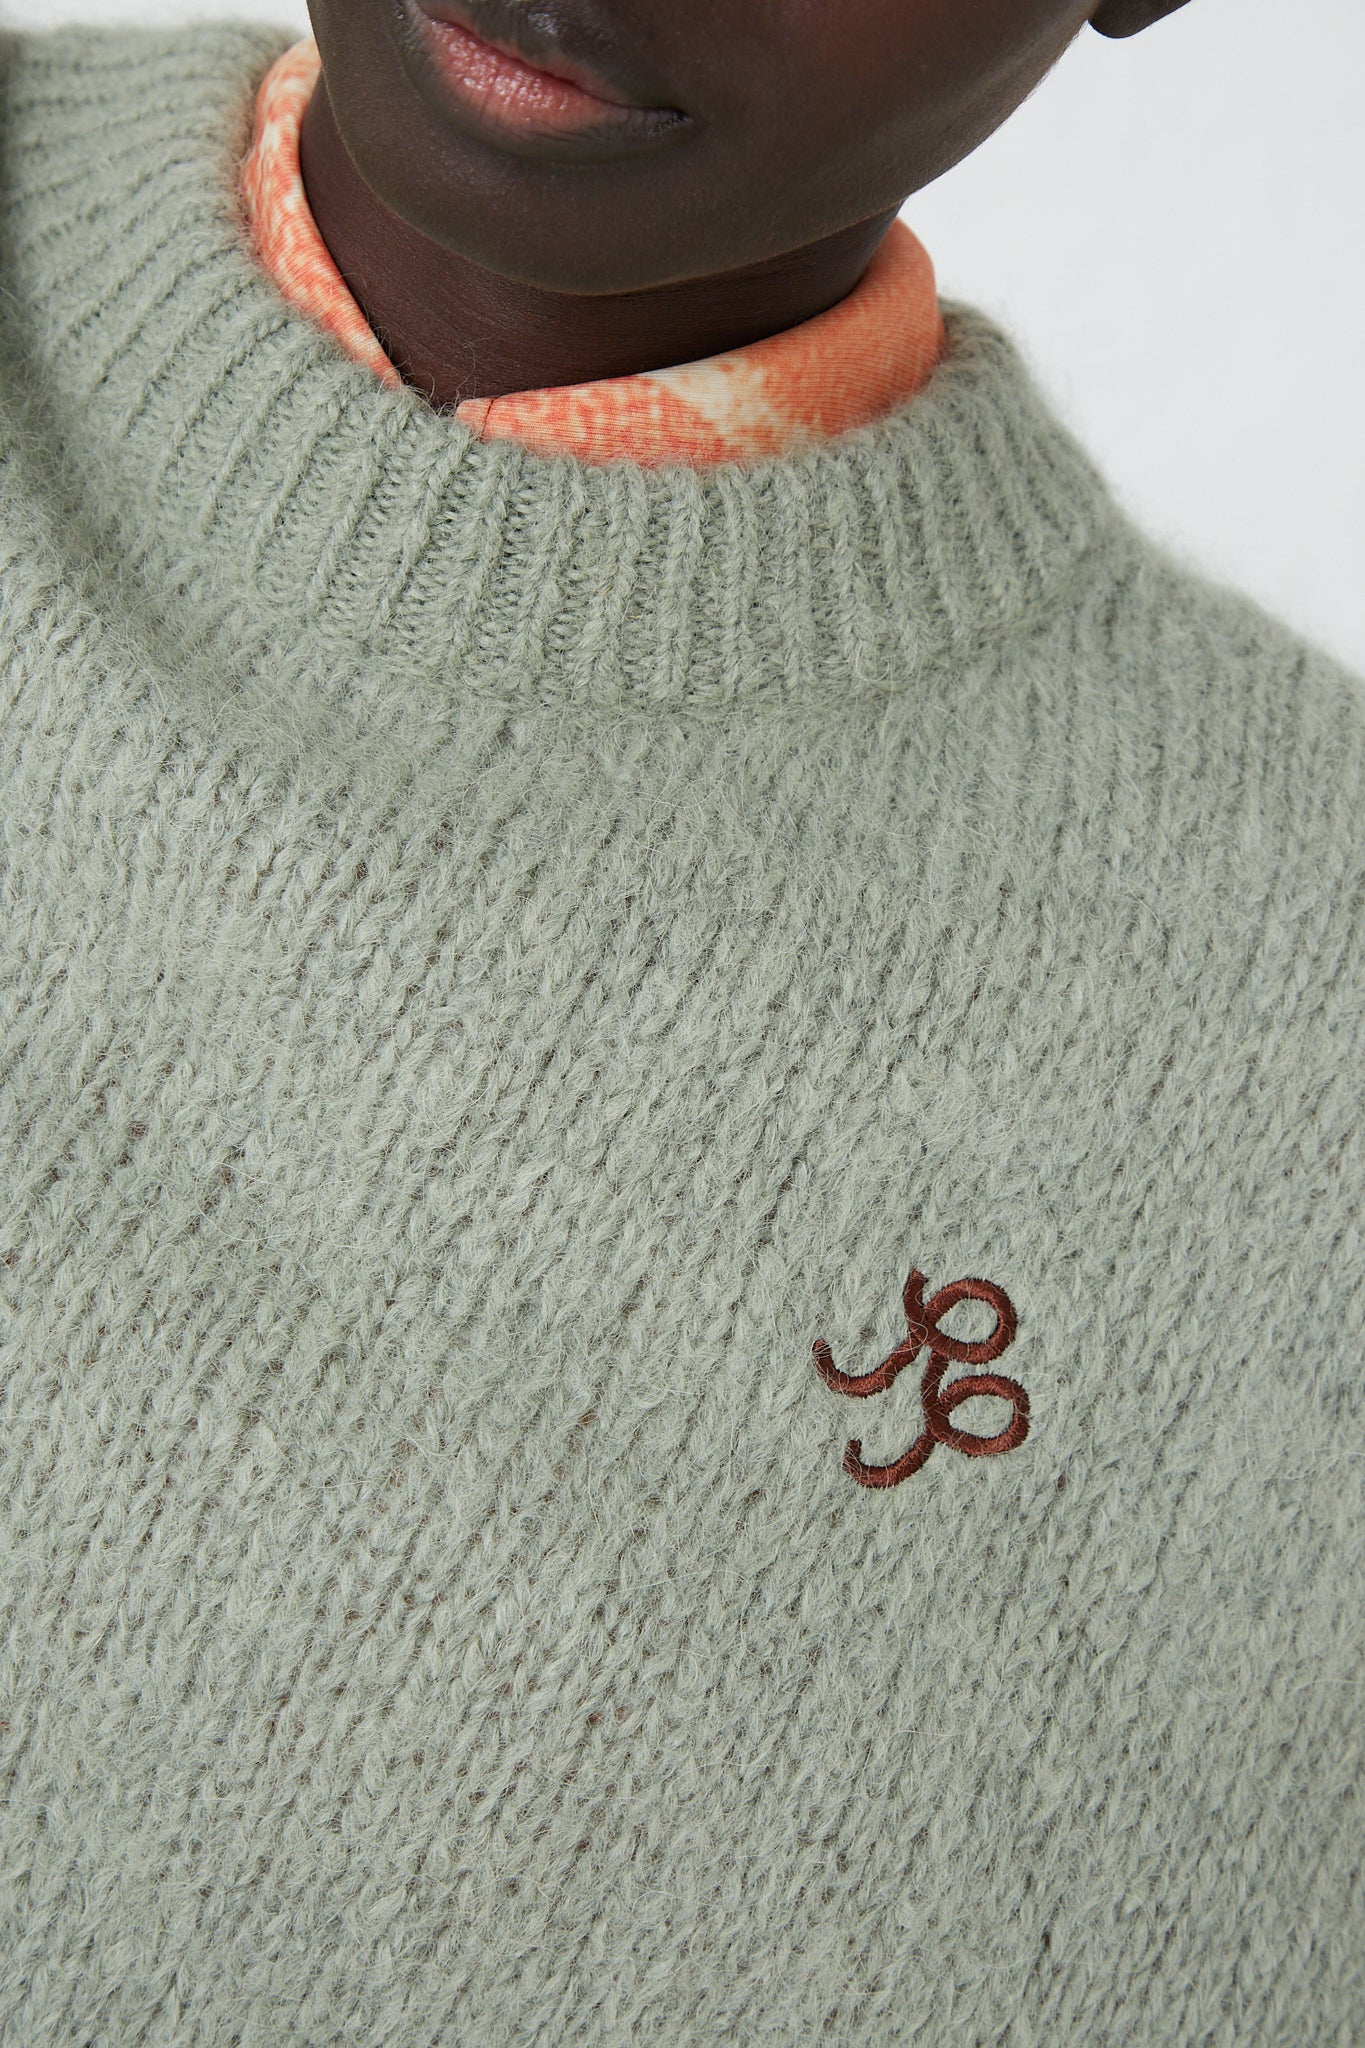 A woman wearing a green crew neck Alpaca Blend Toni Sweater in Mint with a brown Rejina Pyo logo detail.